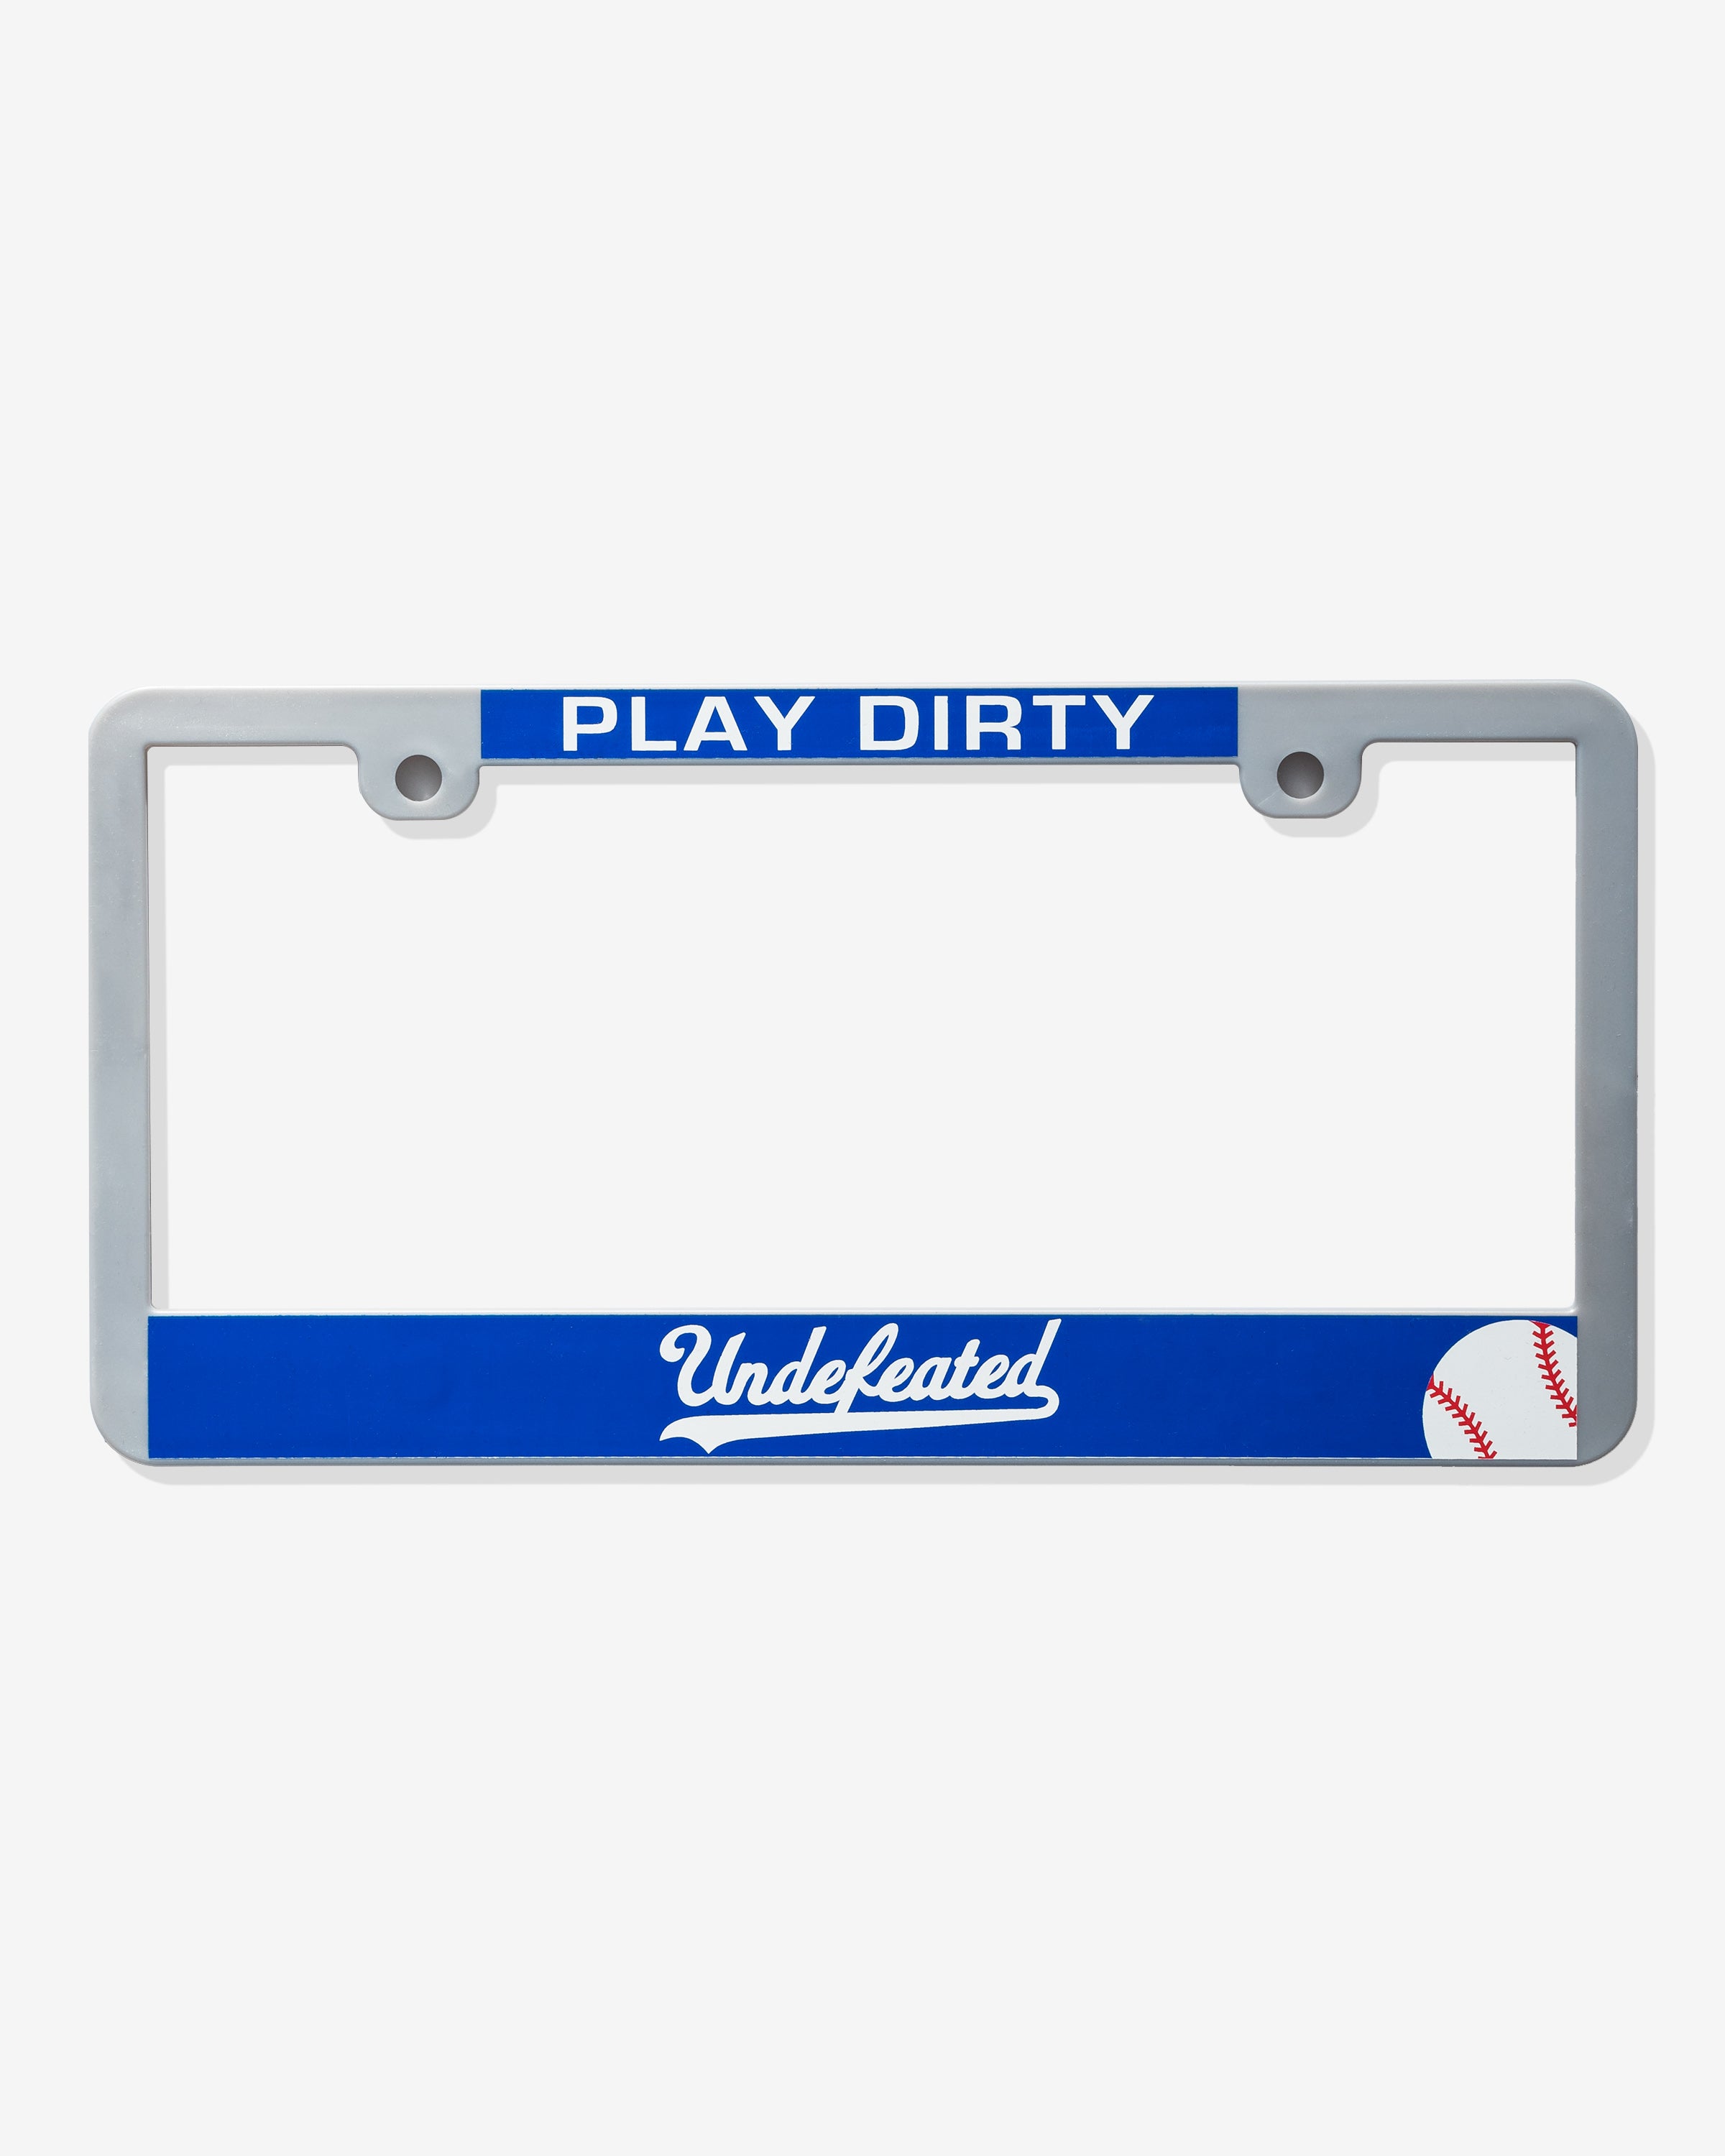 UNDEFEATED LICENSE PLATE - MULTI